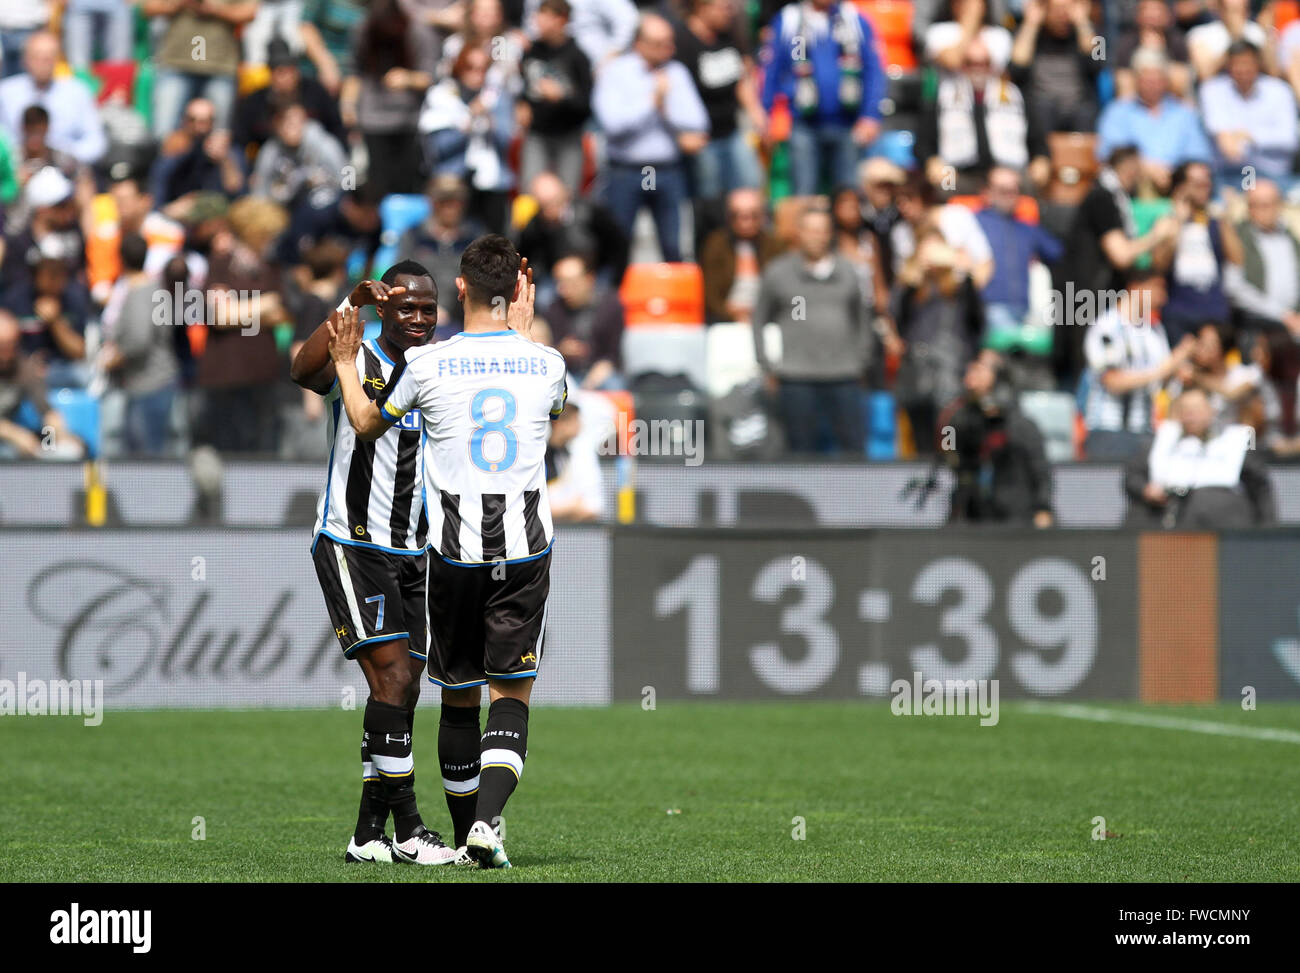 Udine, Italy. 03rd Apr, 2016. Udinese's midfielder Borges Bruno Fernandes (R) celebrates after scoring a goal 2-1 with Udinese's midfielder Emmanuel Agyemang Badu during the Italian Serie A football match between Udinese Calcio v SSC Napoli. Udinese defeats Napoli 3-1 in the Italian Serie A football match at Dacia Arena in Udine. Goals for Udinese by Fernandes (2) and Thereau, for Napoli by Higuain. © Andrea Spinelli/Pacific Press/Alamy Live News Stock Photo